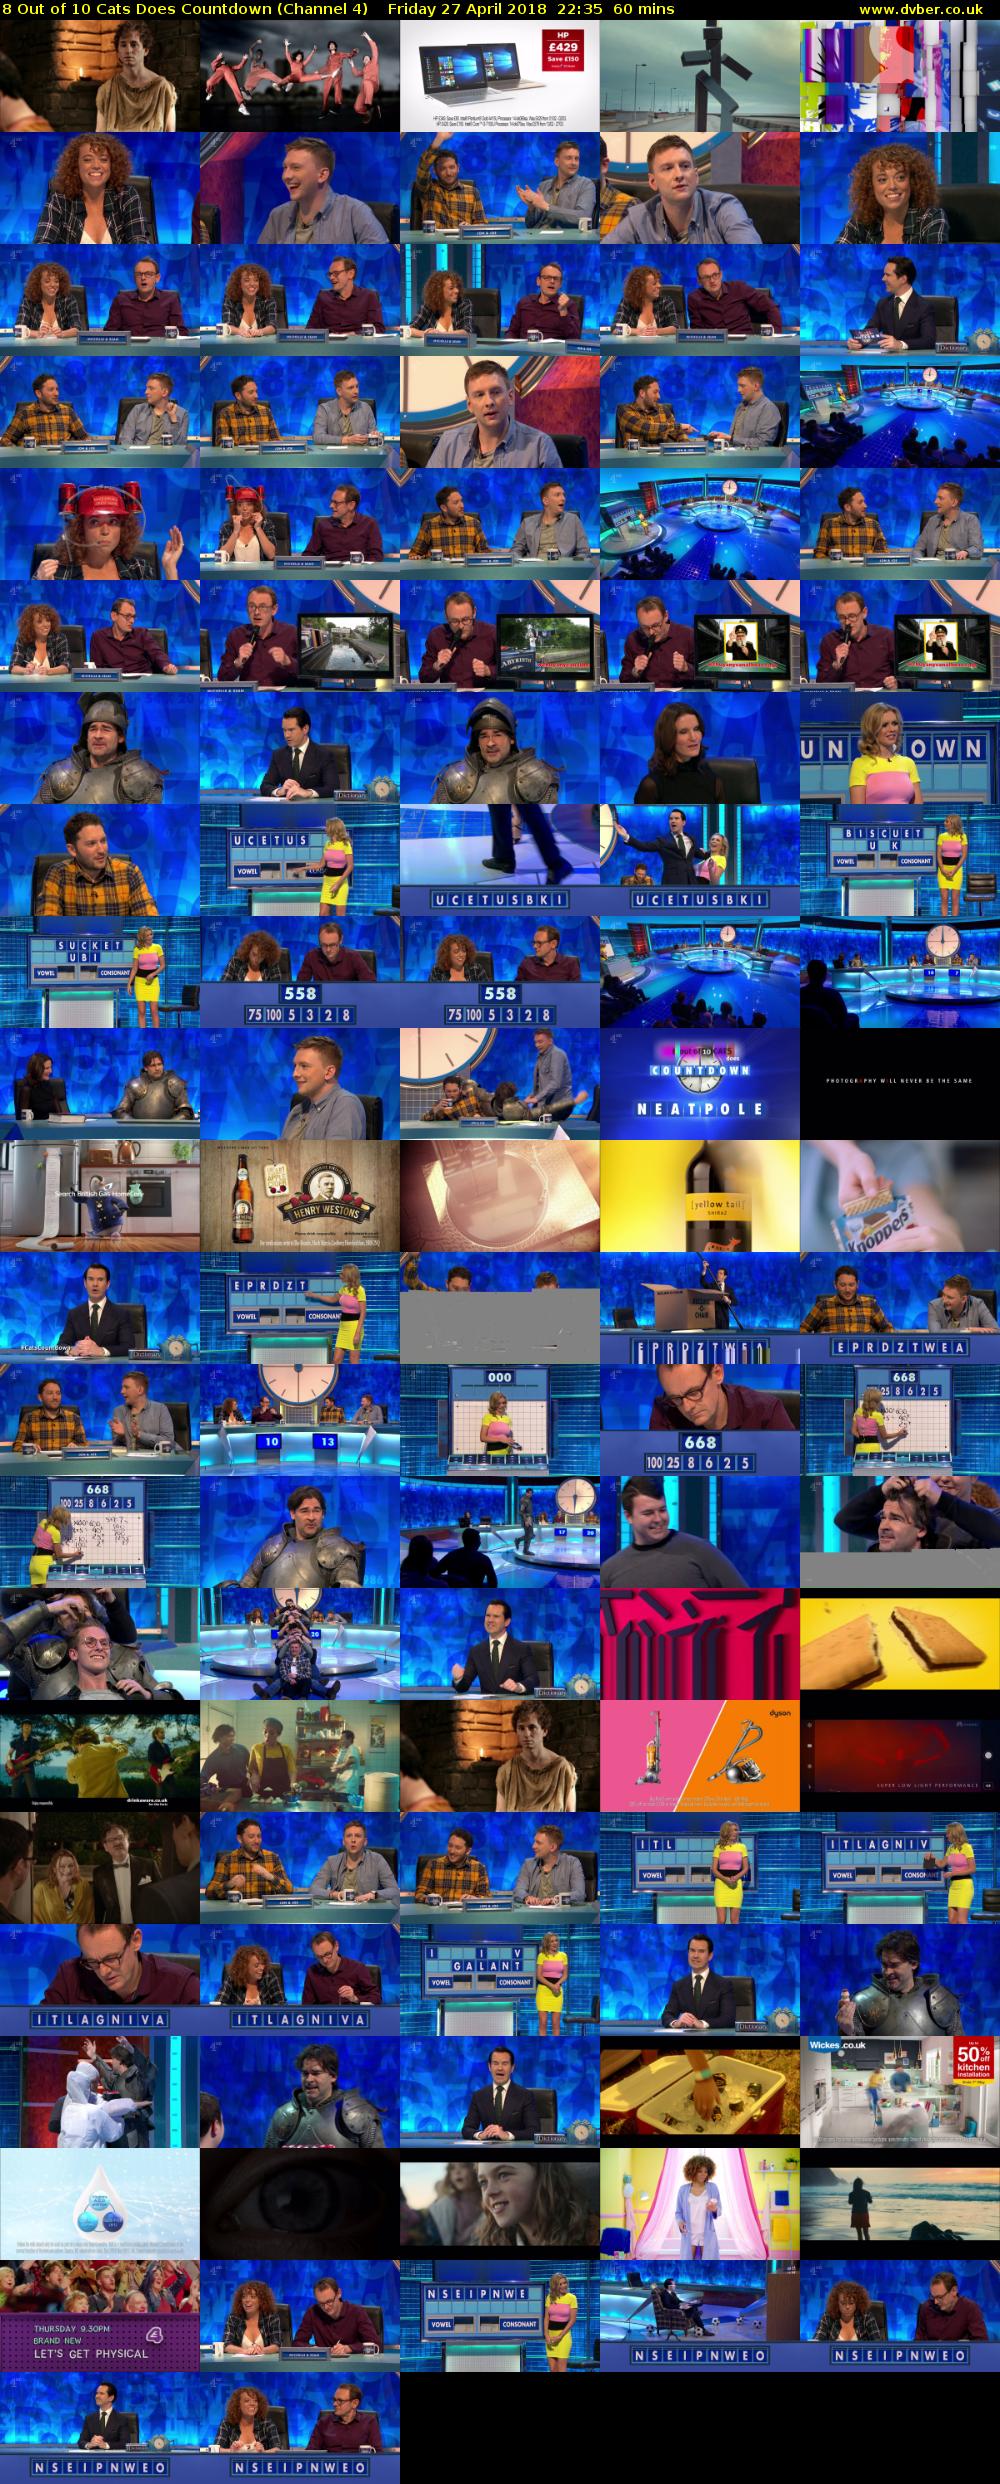 8 Out of 10 Cats Does Countdown (Channel 4) Friday 27 April 2018 22:35 - 23:35